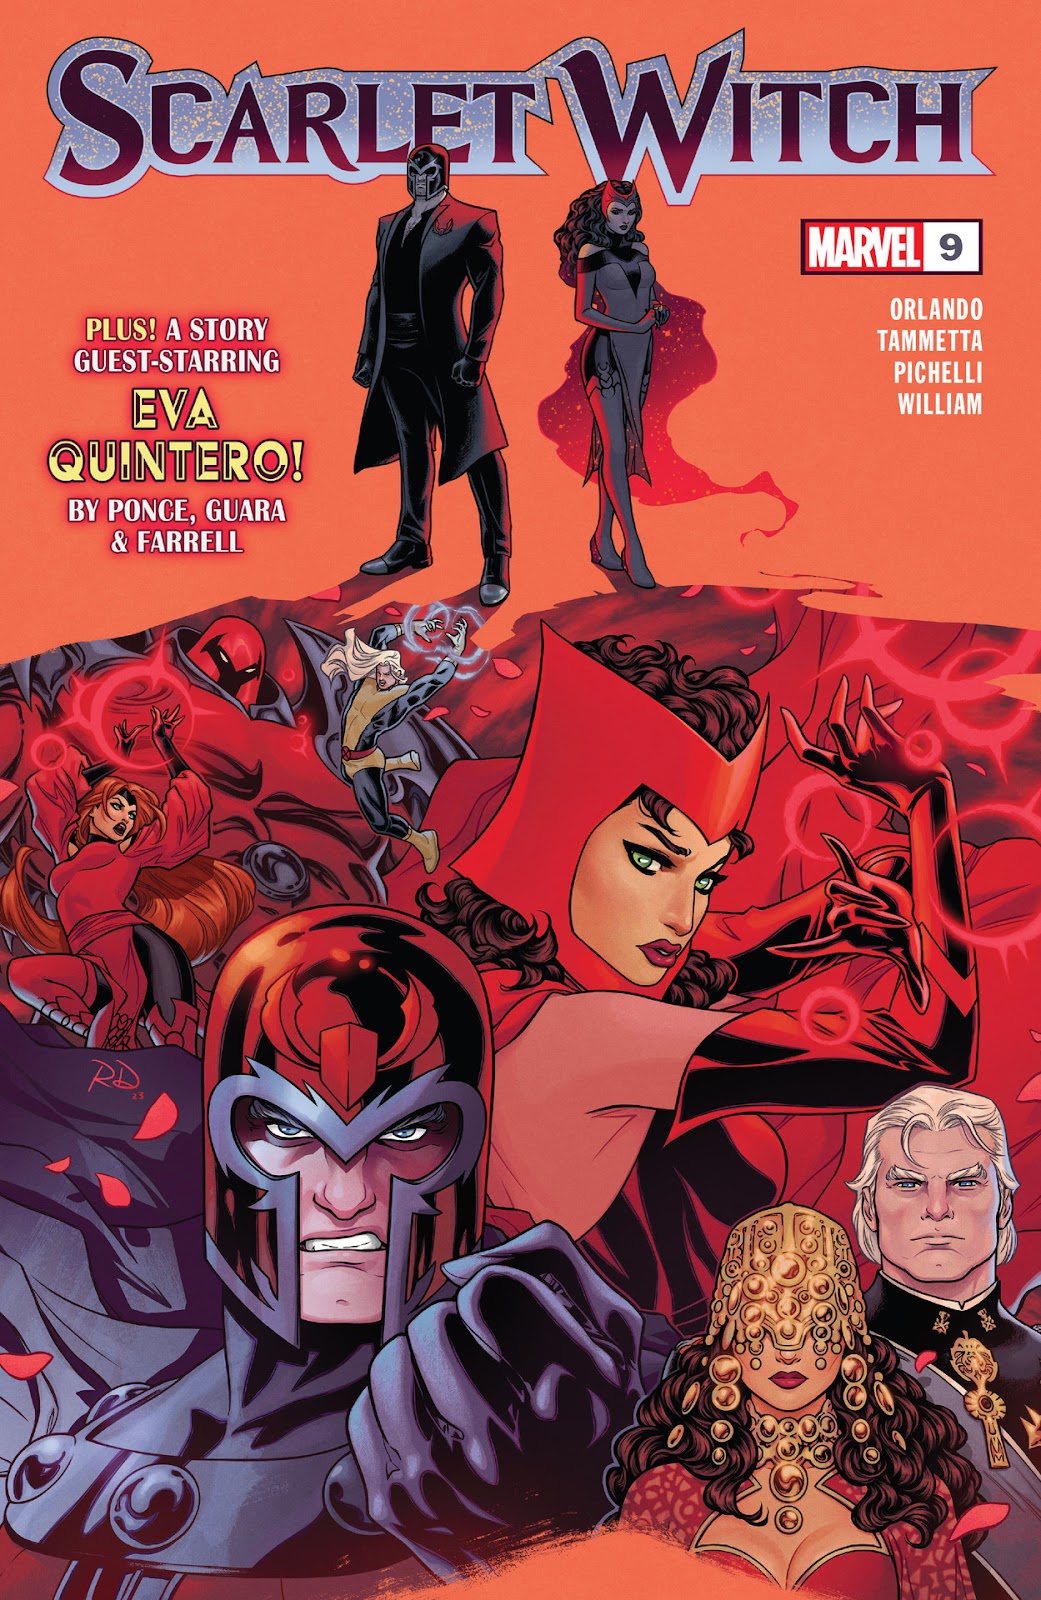 Vision And The Scarlet Witch V2 04  Read Vision And The Scarlet Witch V2  04 comic online in high quality. Read Full Comic online for free - Read  comics online in